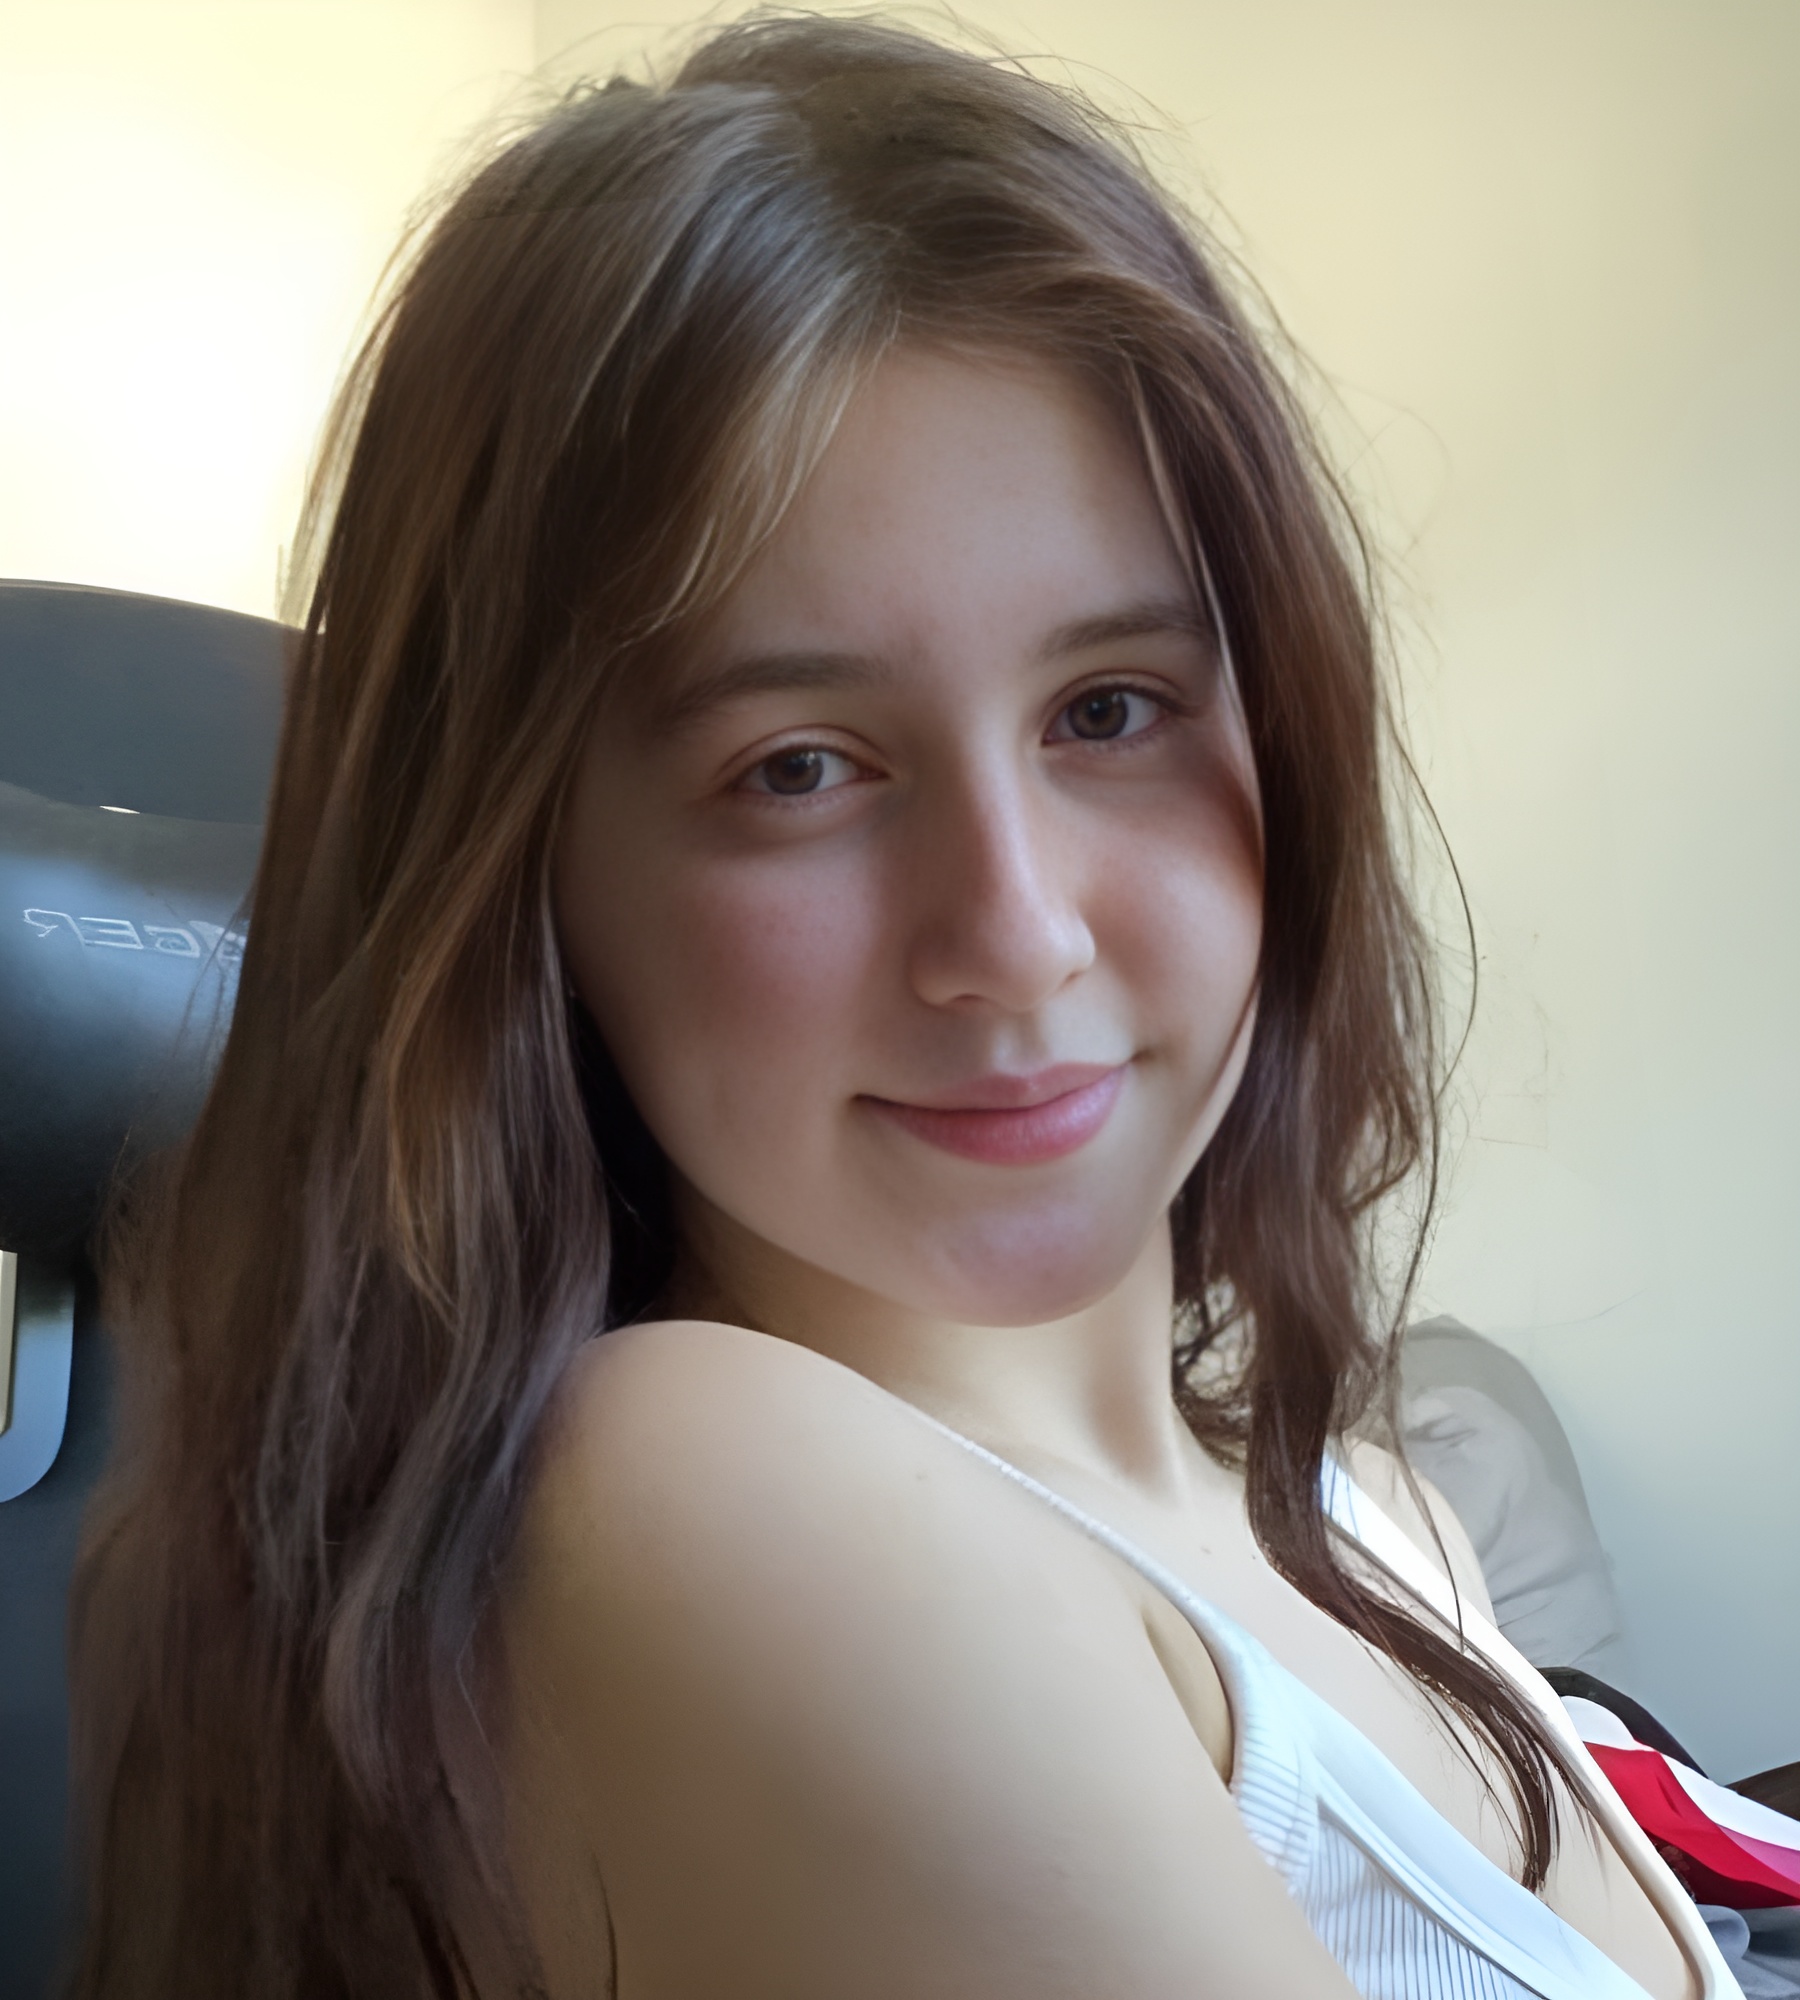 Alana Rose (Actress) Age, Wiki, Biography, Height, Boyfriend, Weight and More